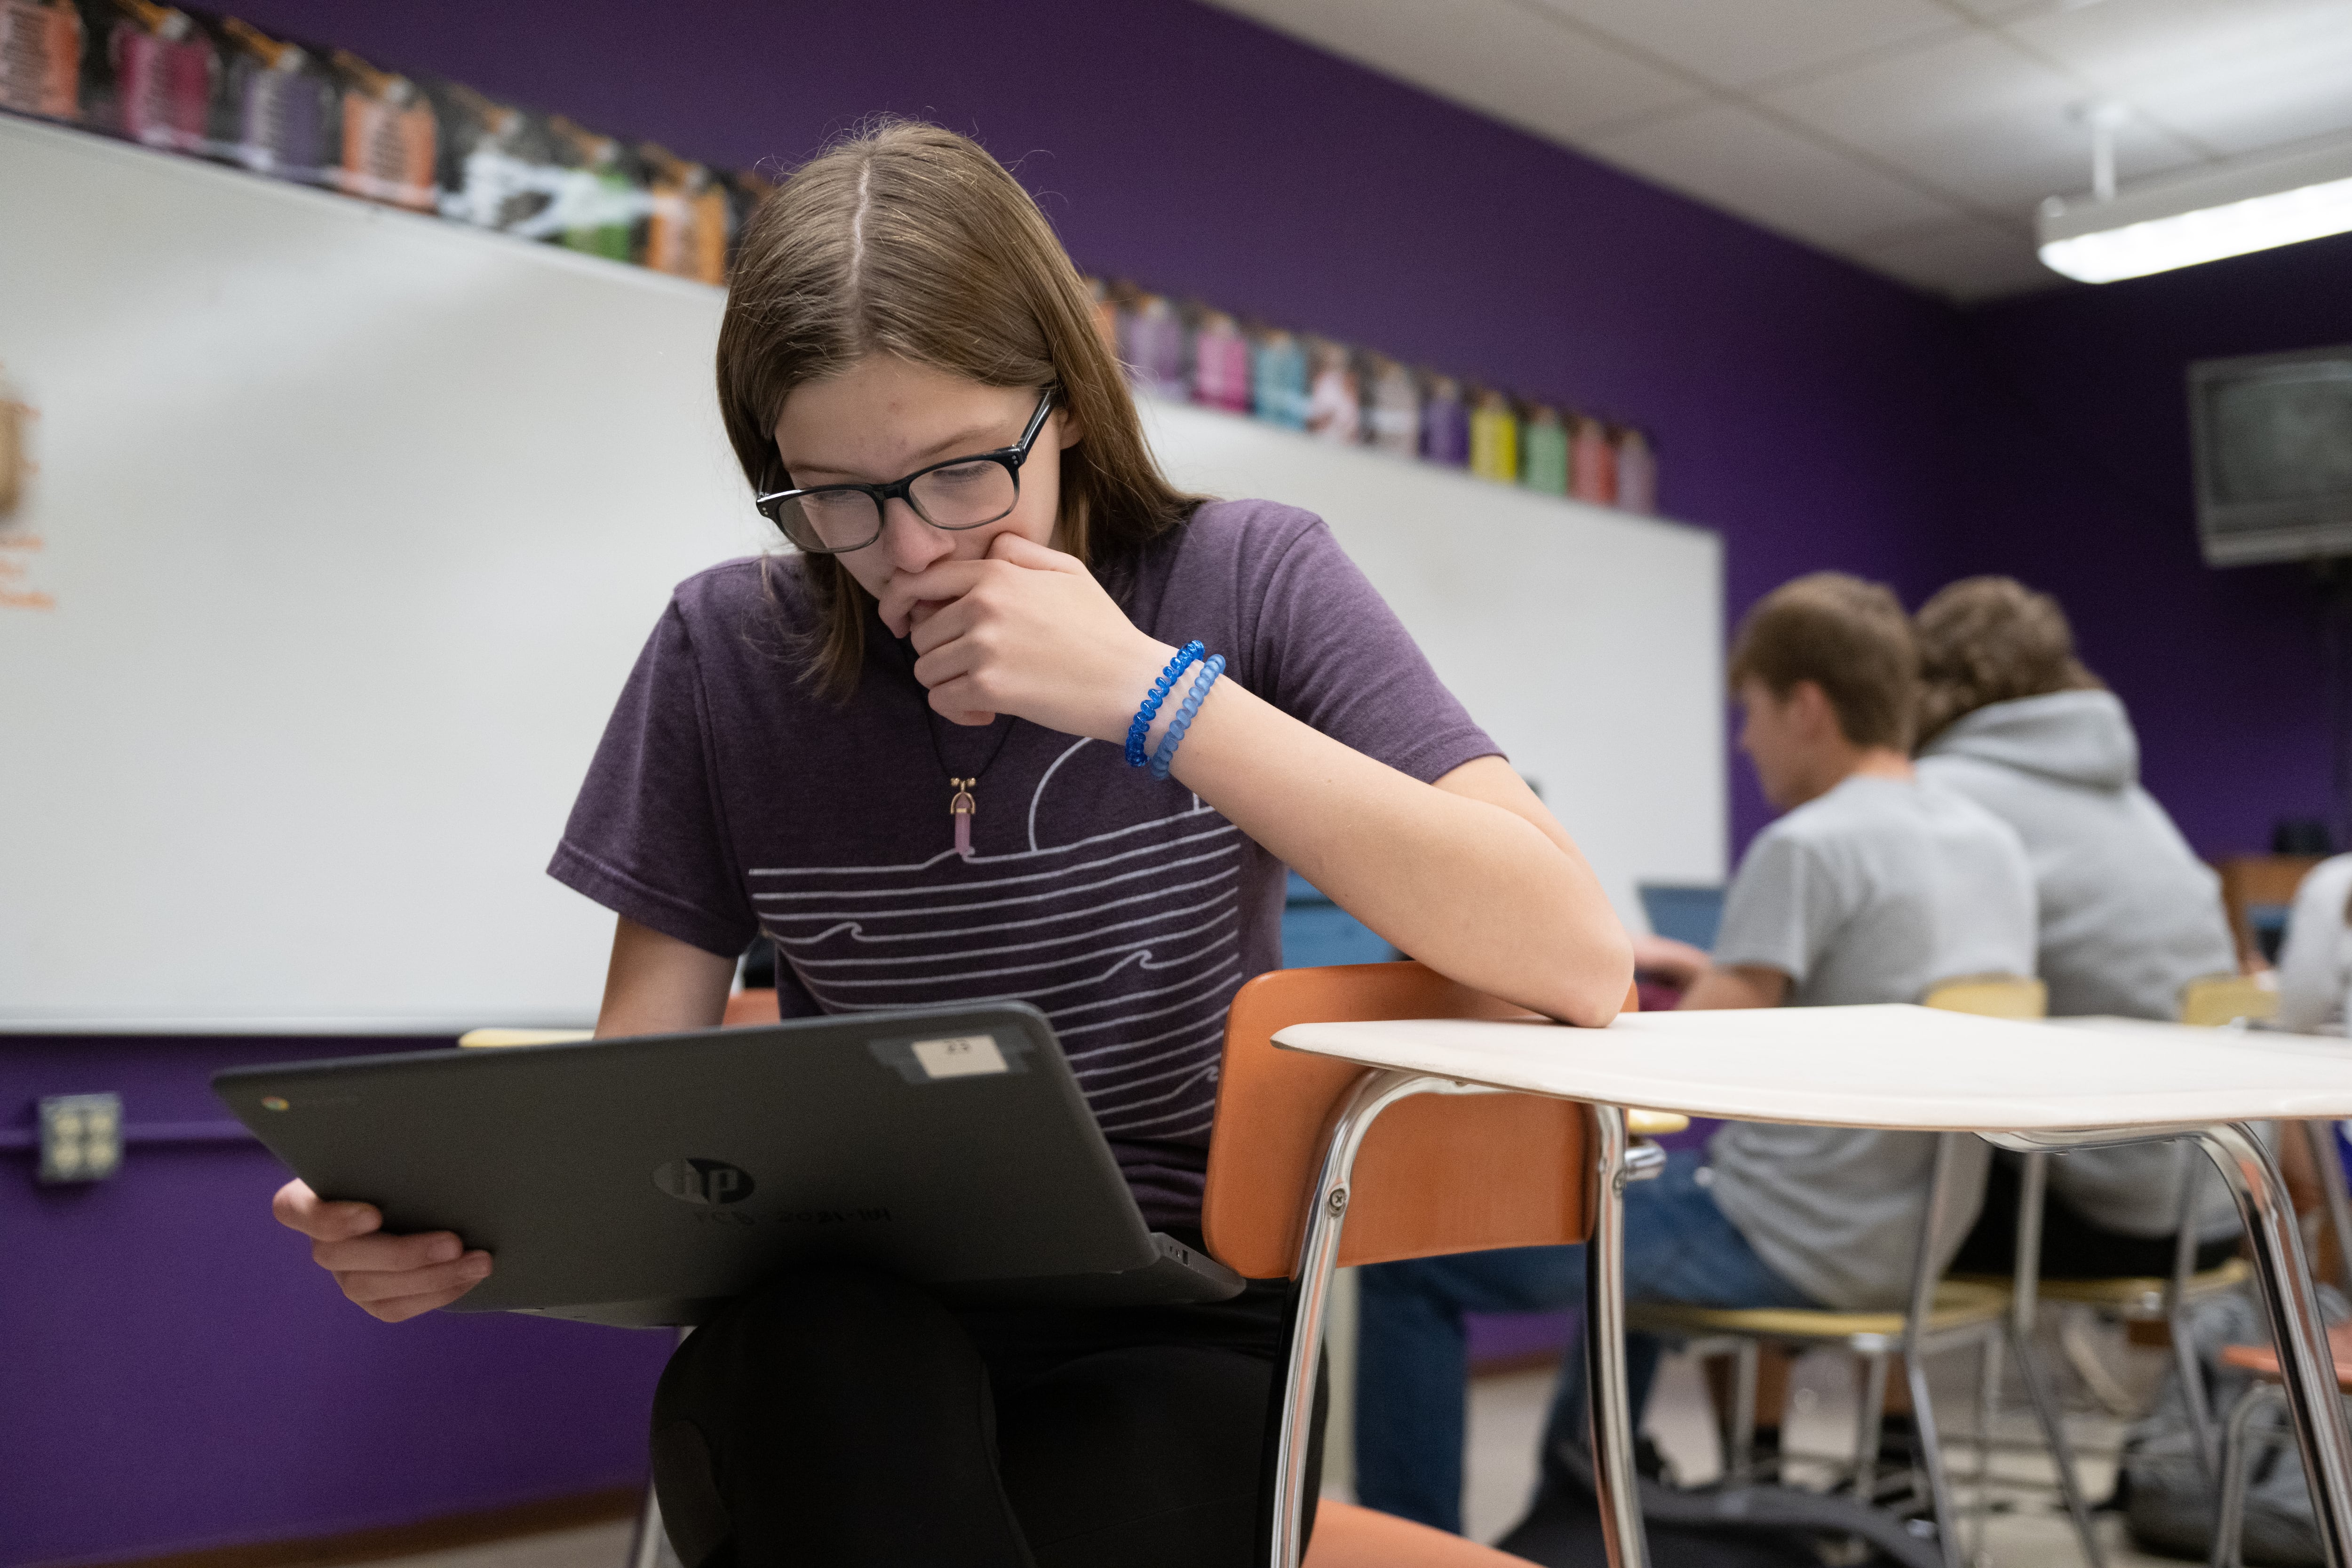 student with glasses and a purple shirt looks down at a computer screen while sitting in a classroom